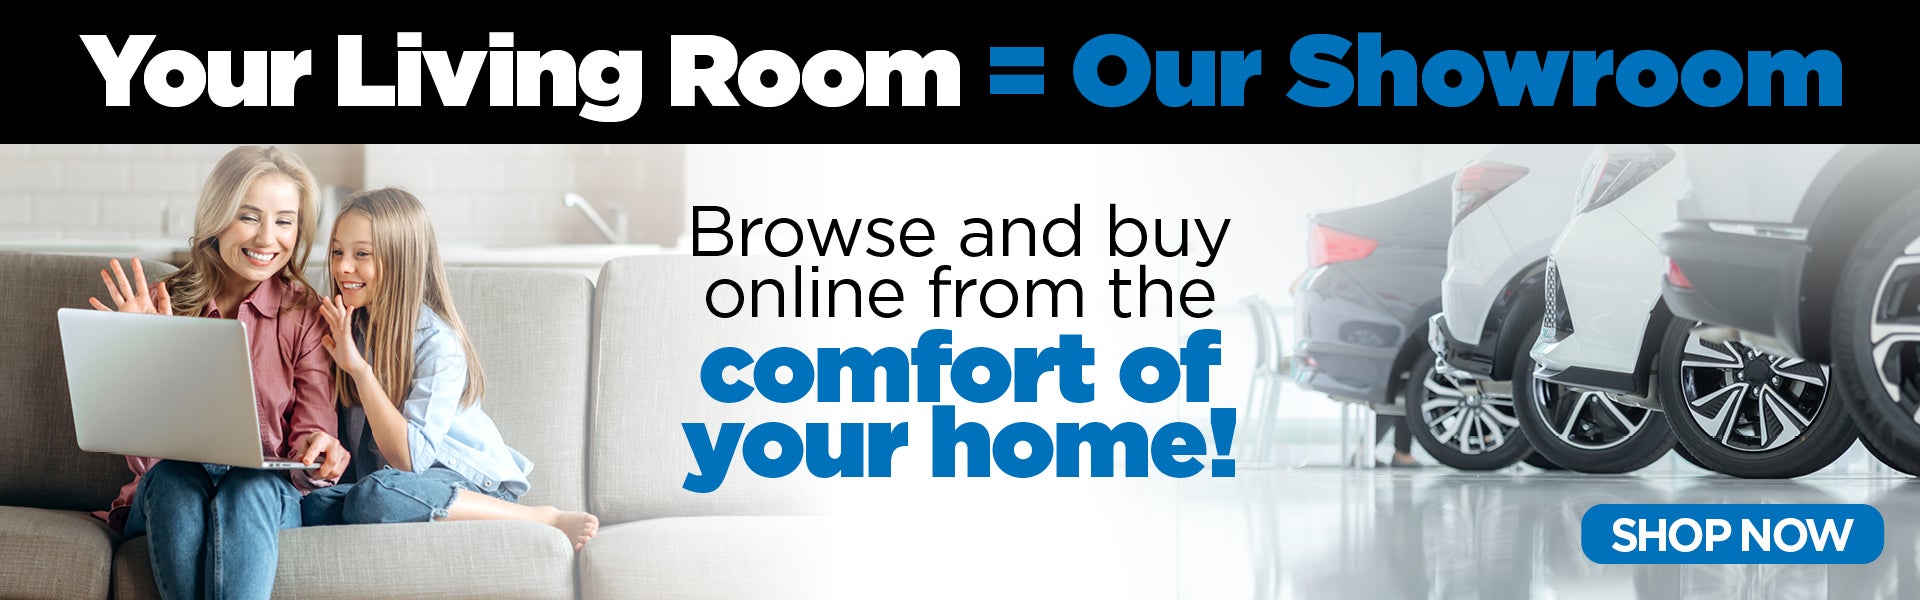 Your Living Room = Our Showroom